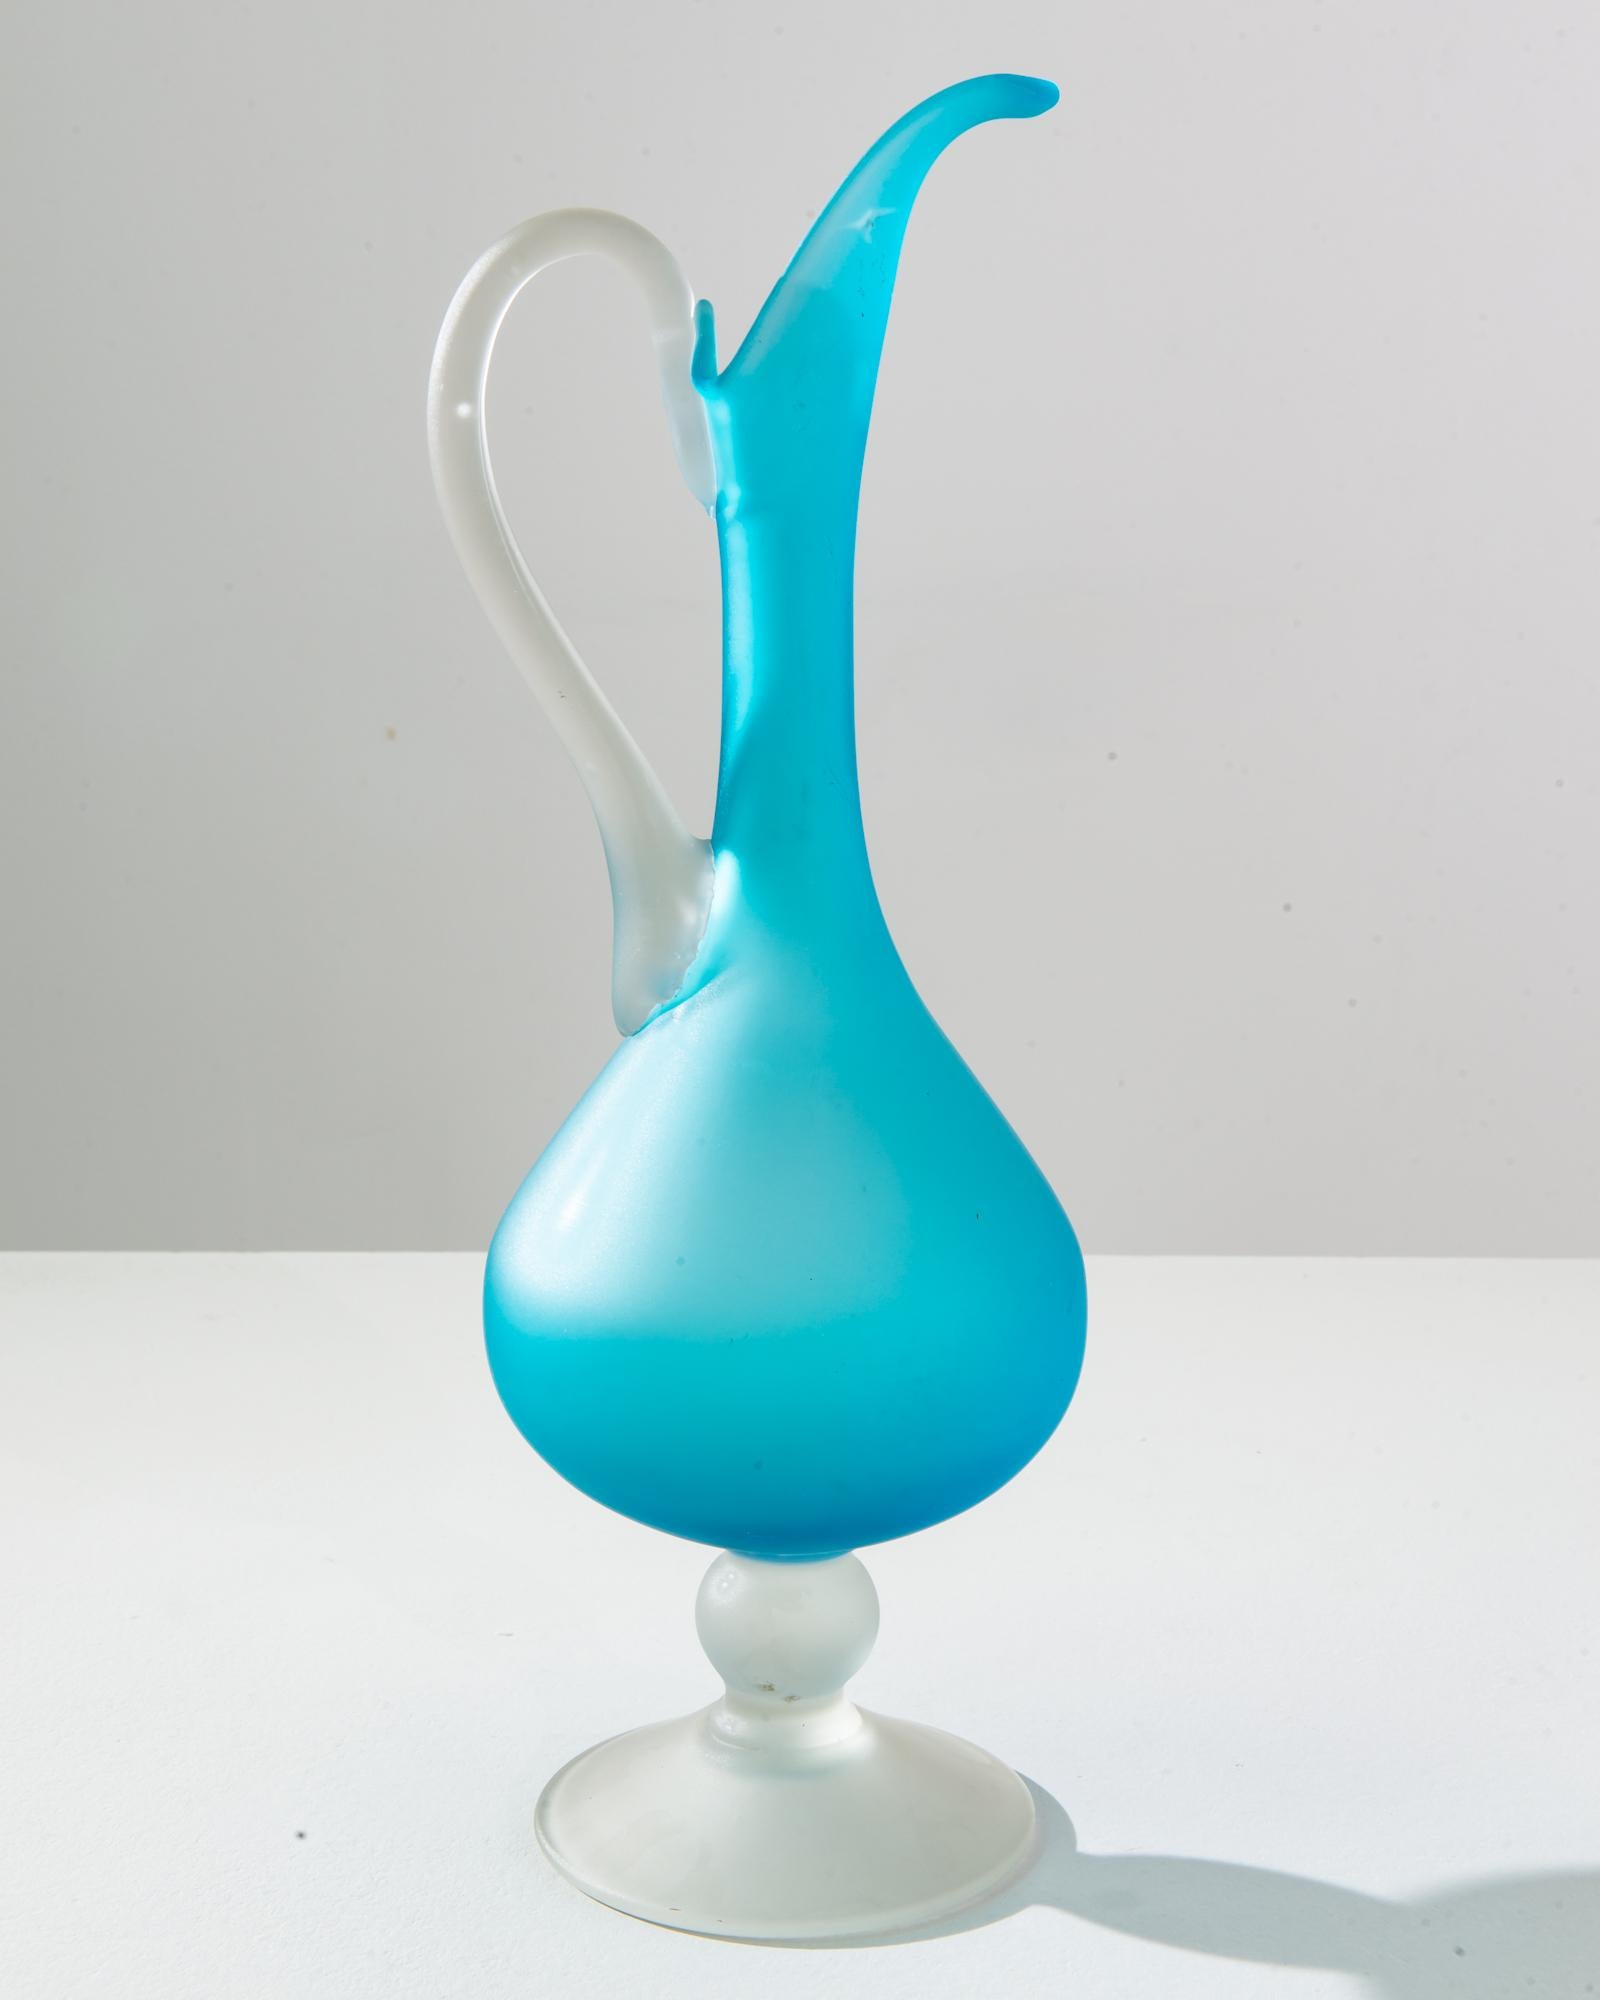 Immerse yourself in the cool, serene beauty of this 1960s Italian blue glass jug, a stunning piece that reflects the free-spirited creativity of the era. The jug’s body boasts a captivating sky blue color that seems to hold the essence of the